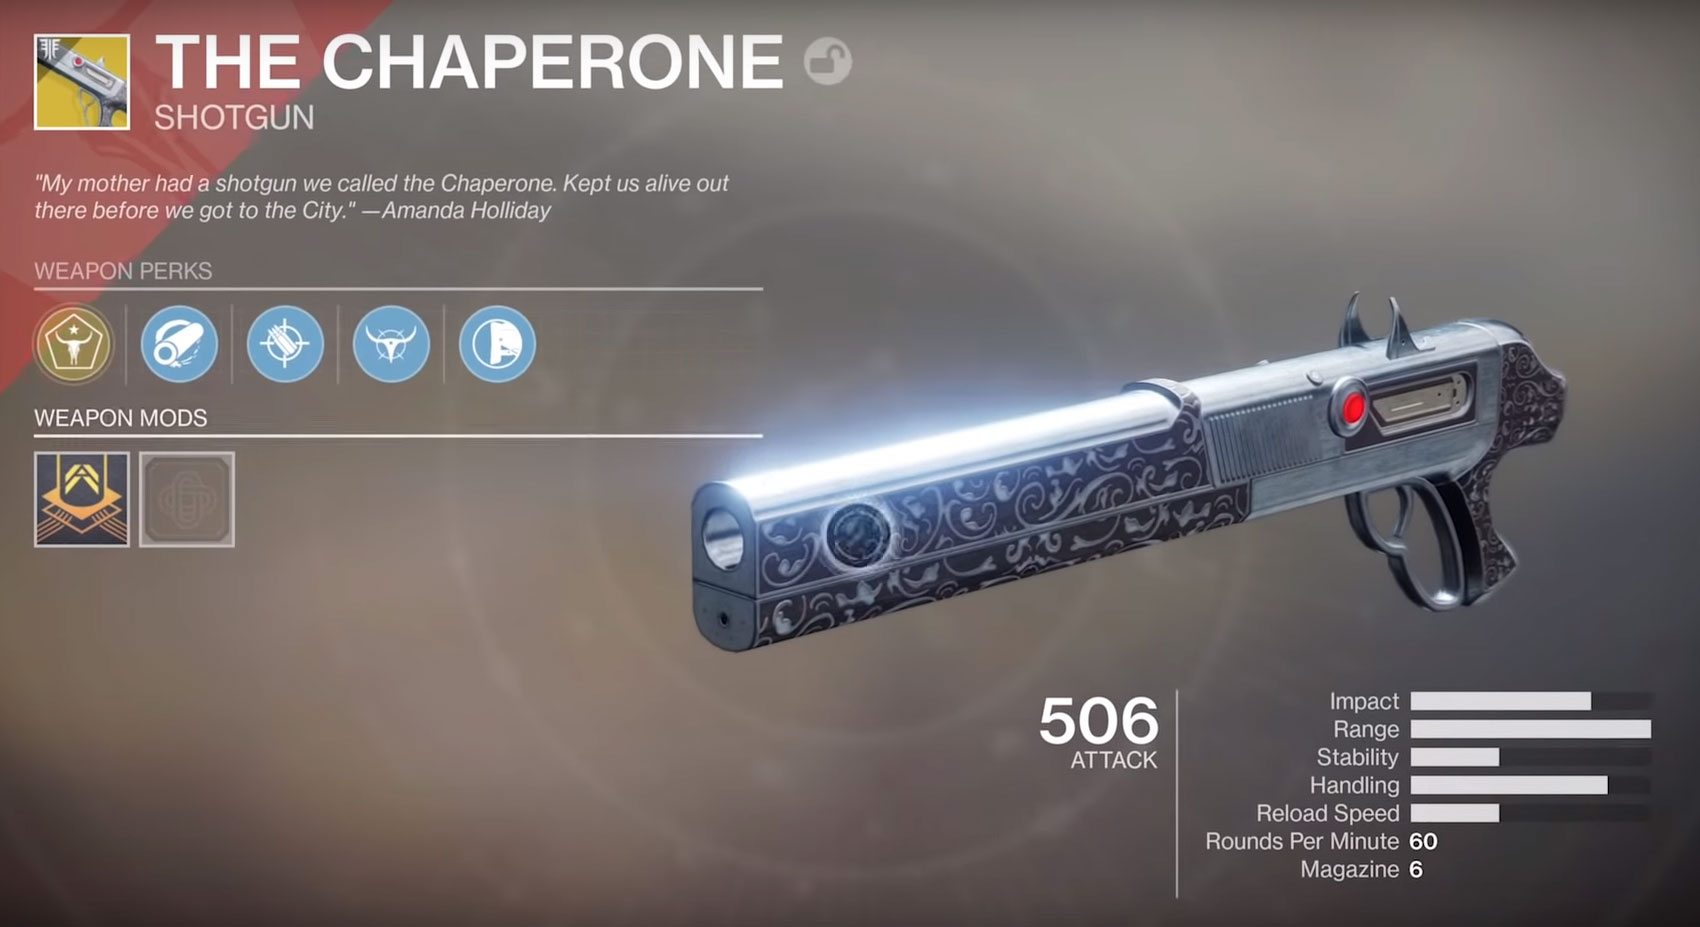 Howto Get The Chaperone Quest Steps Guide (Exotic Shotgun) Destiny